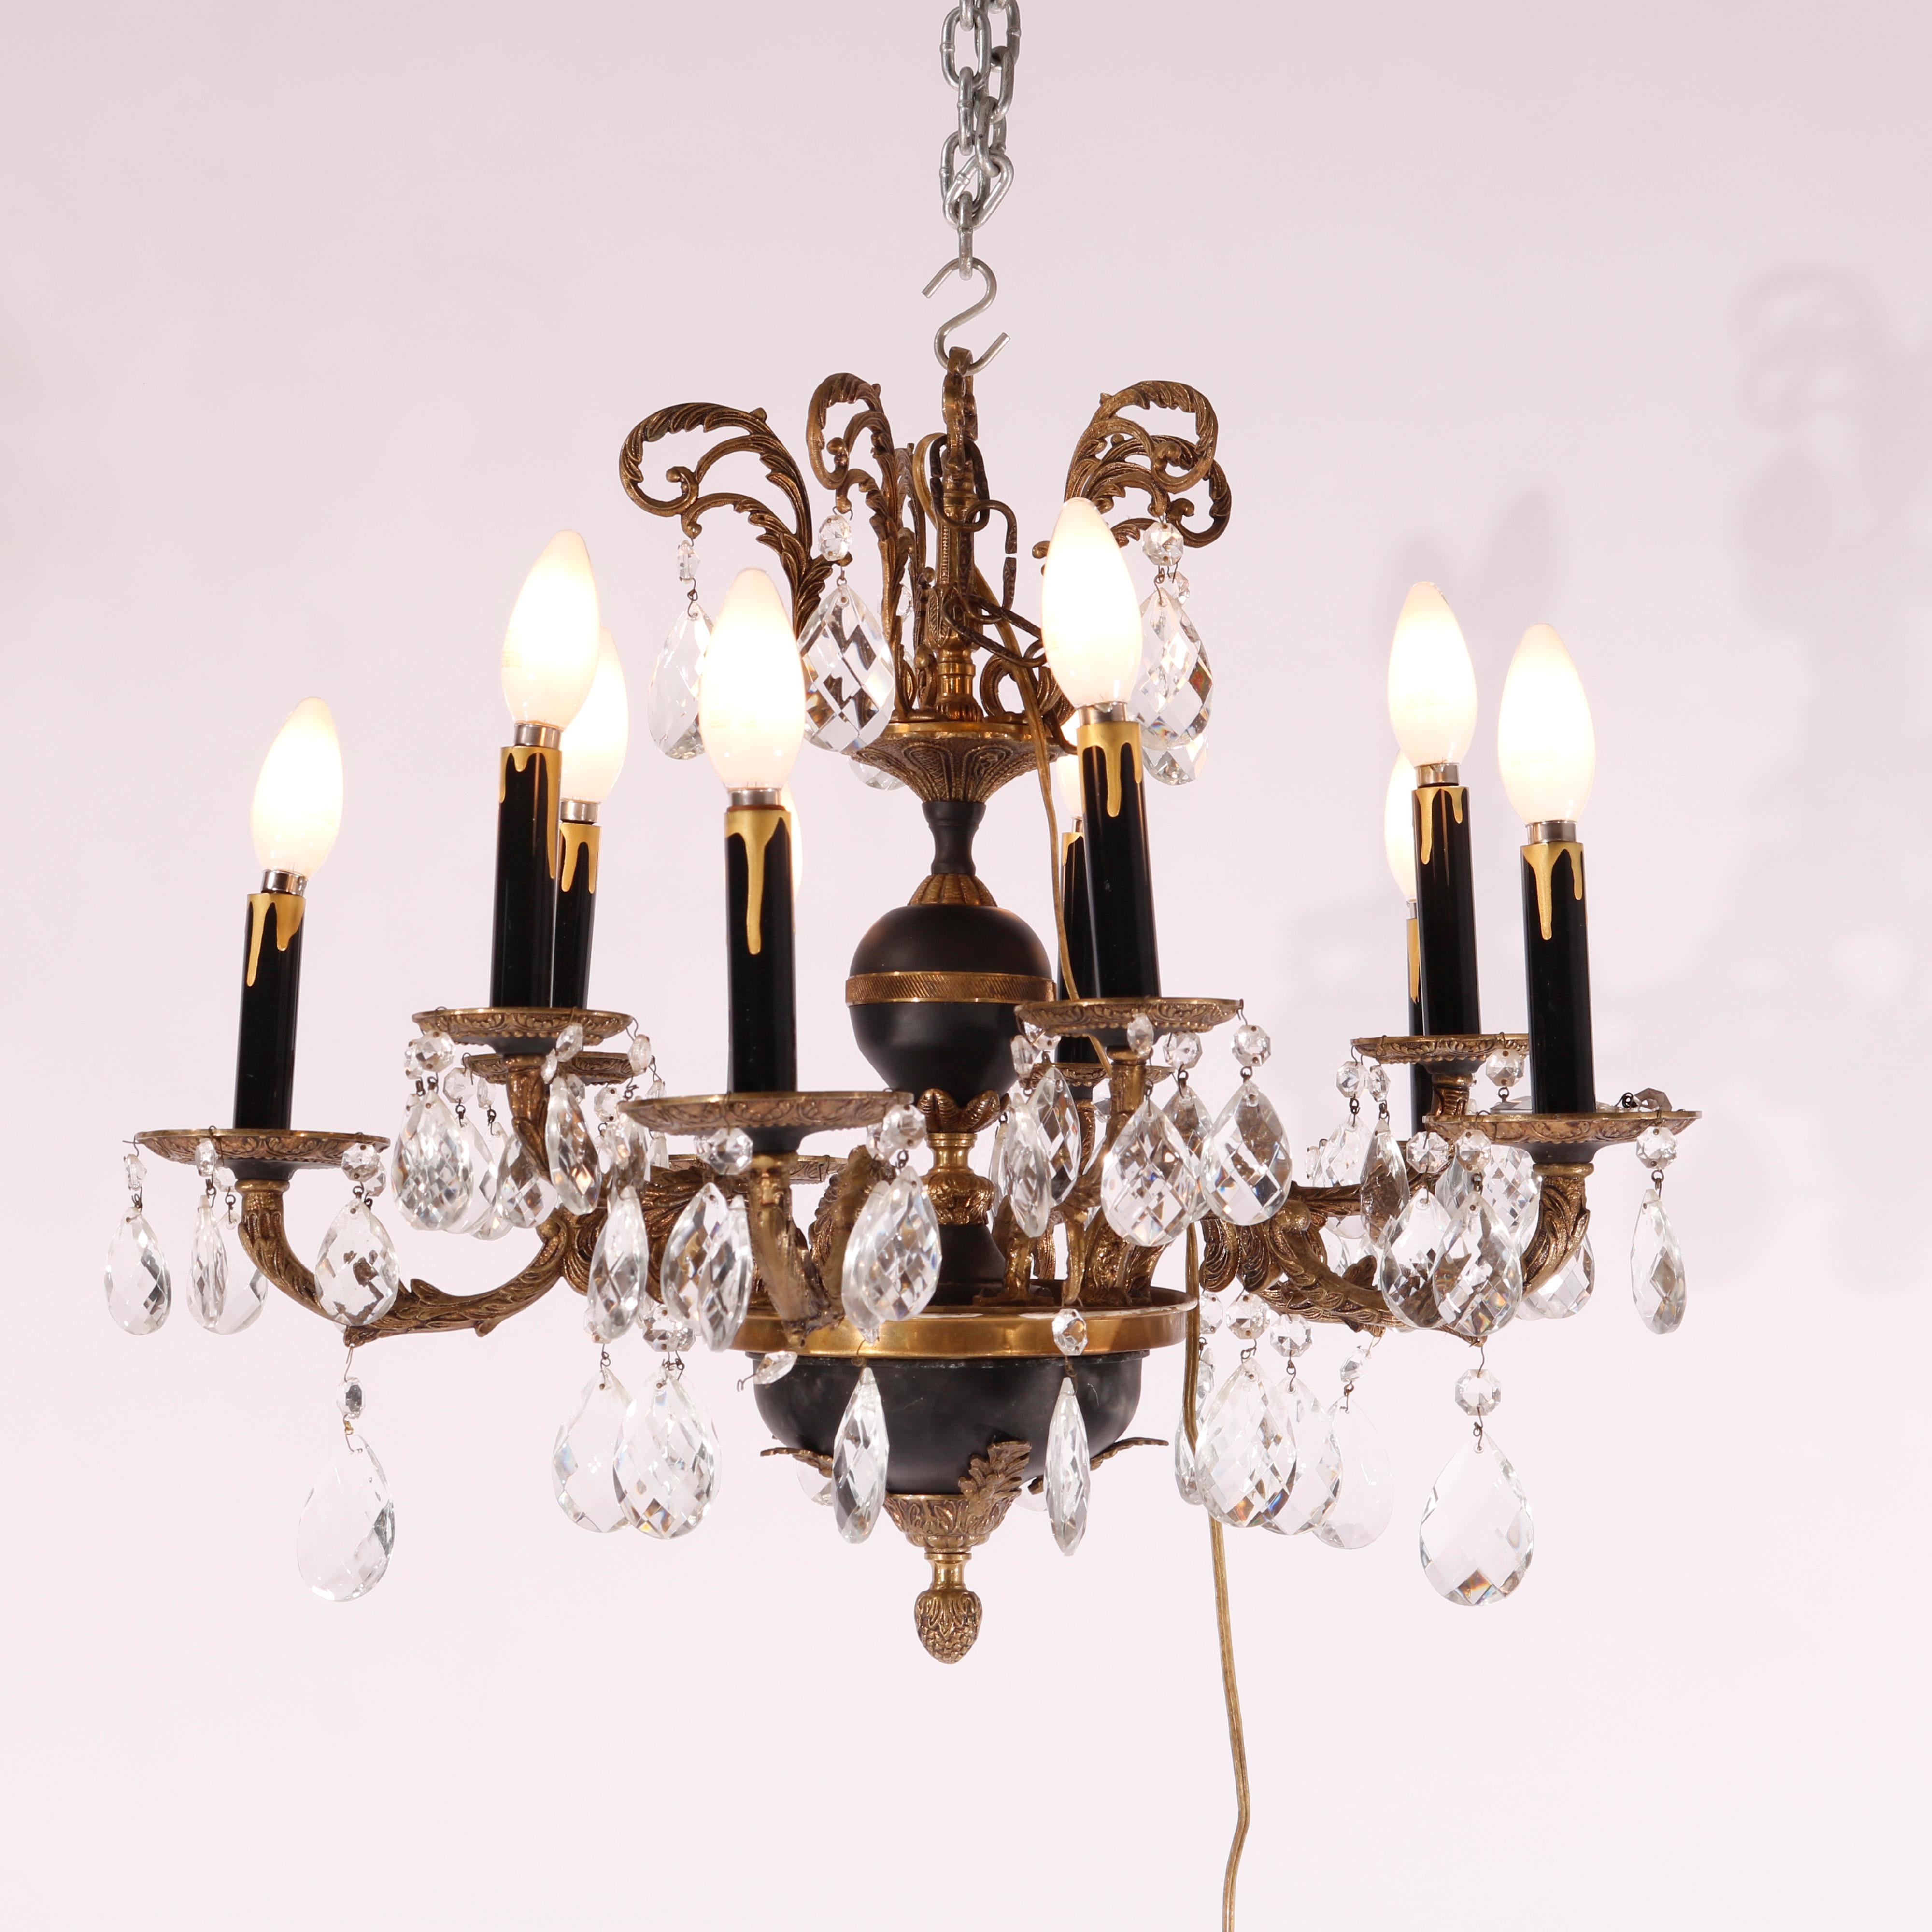 An antique French Empire chandelier offers ebonized and gilt metal frame with scroll and foliate elements, hanging cut crystal highlights throughout, c1930

Measures - 19